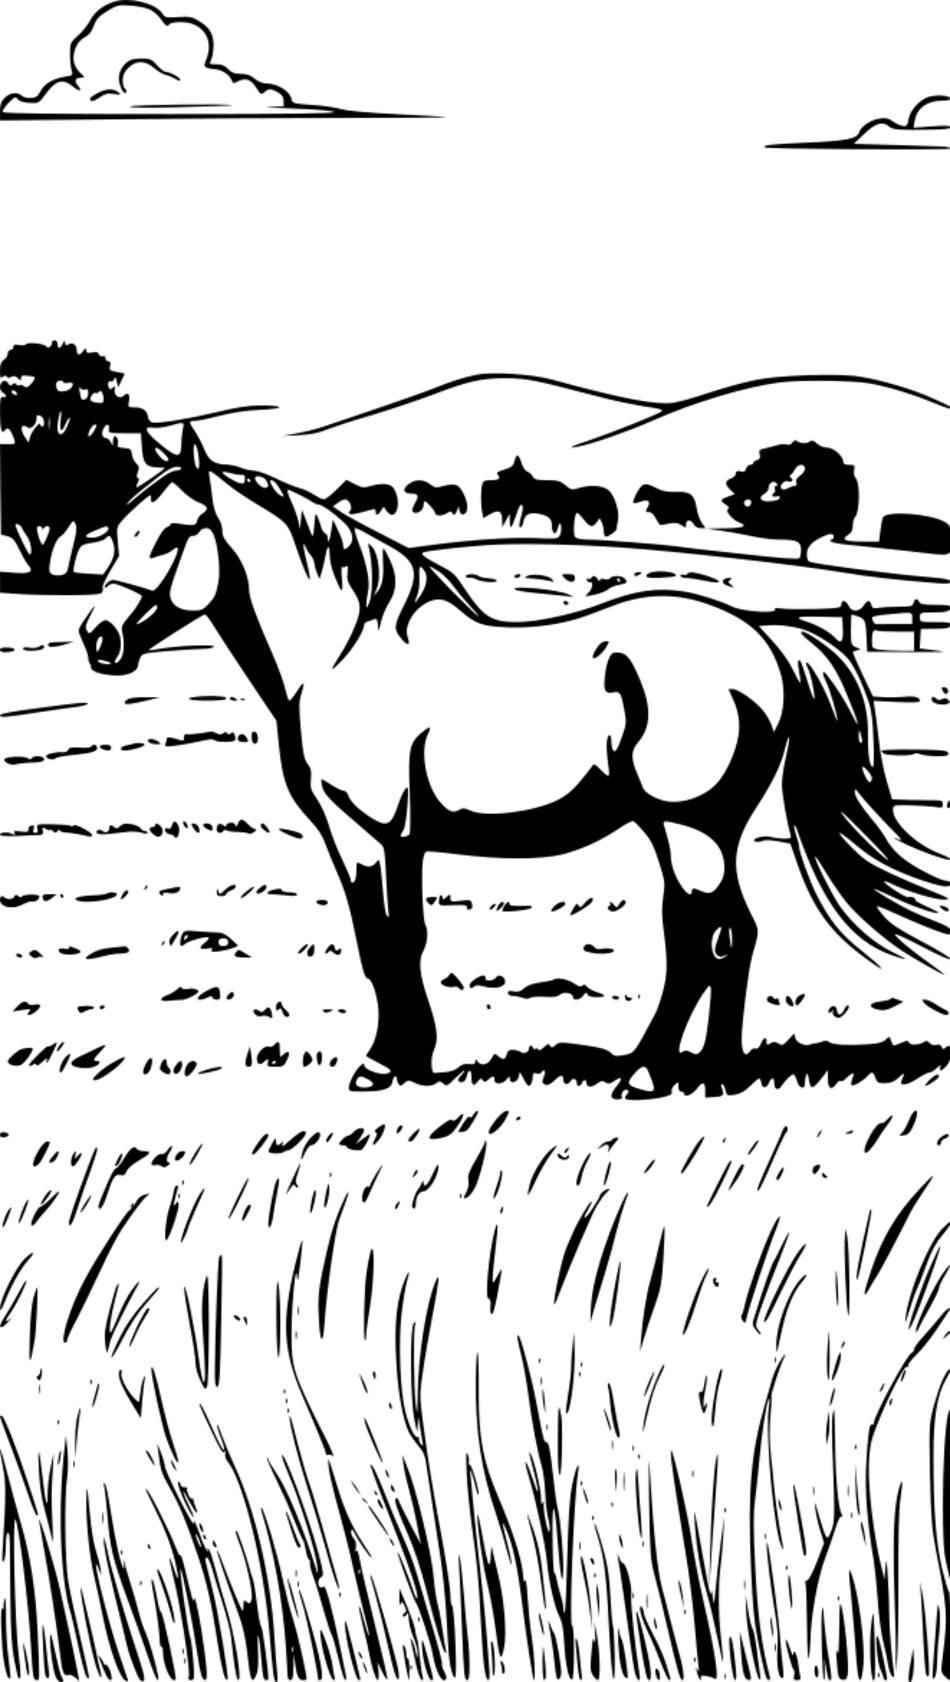 Coloring book Horses in the pasture (Vertical)